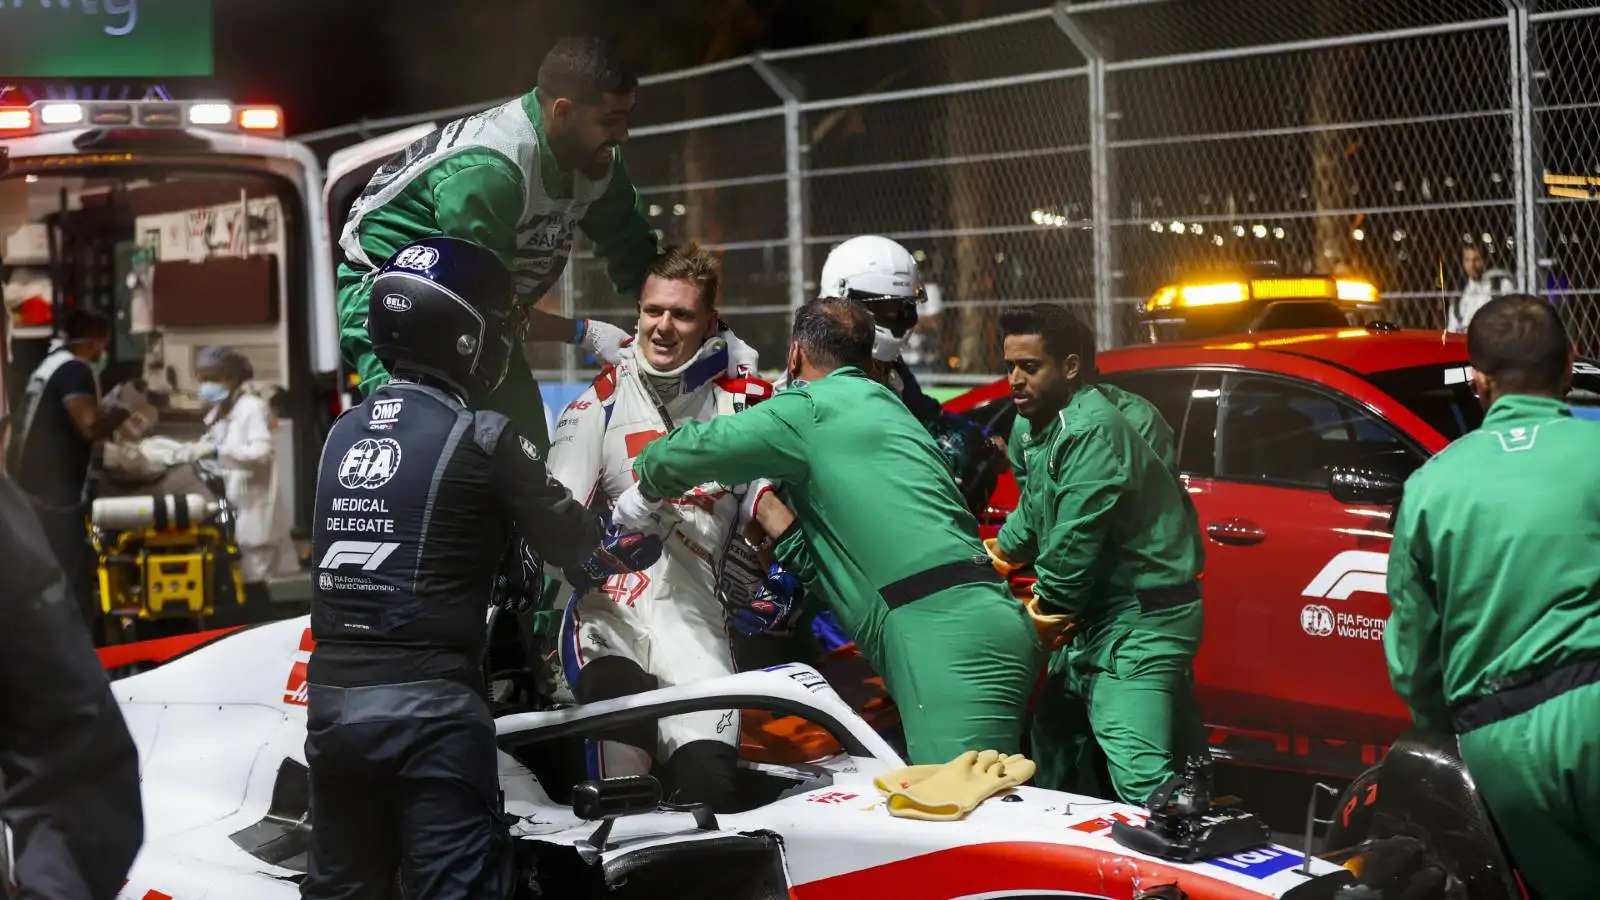 Mick Schumacher helped out of his Haas after crashing in Saudi Arabia. Jeddah March 2022.